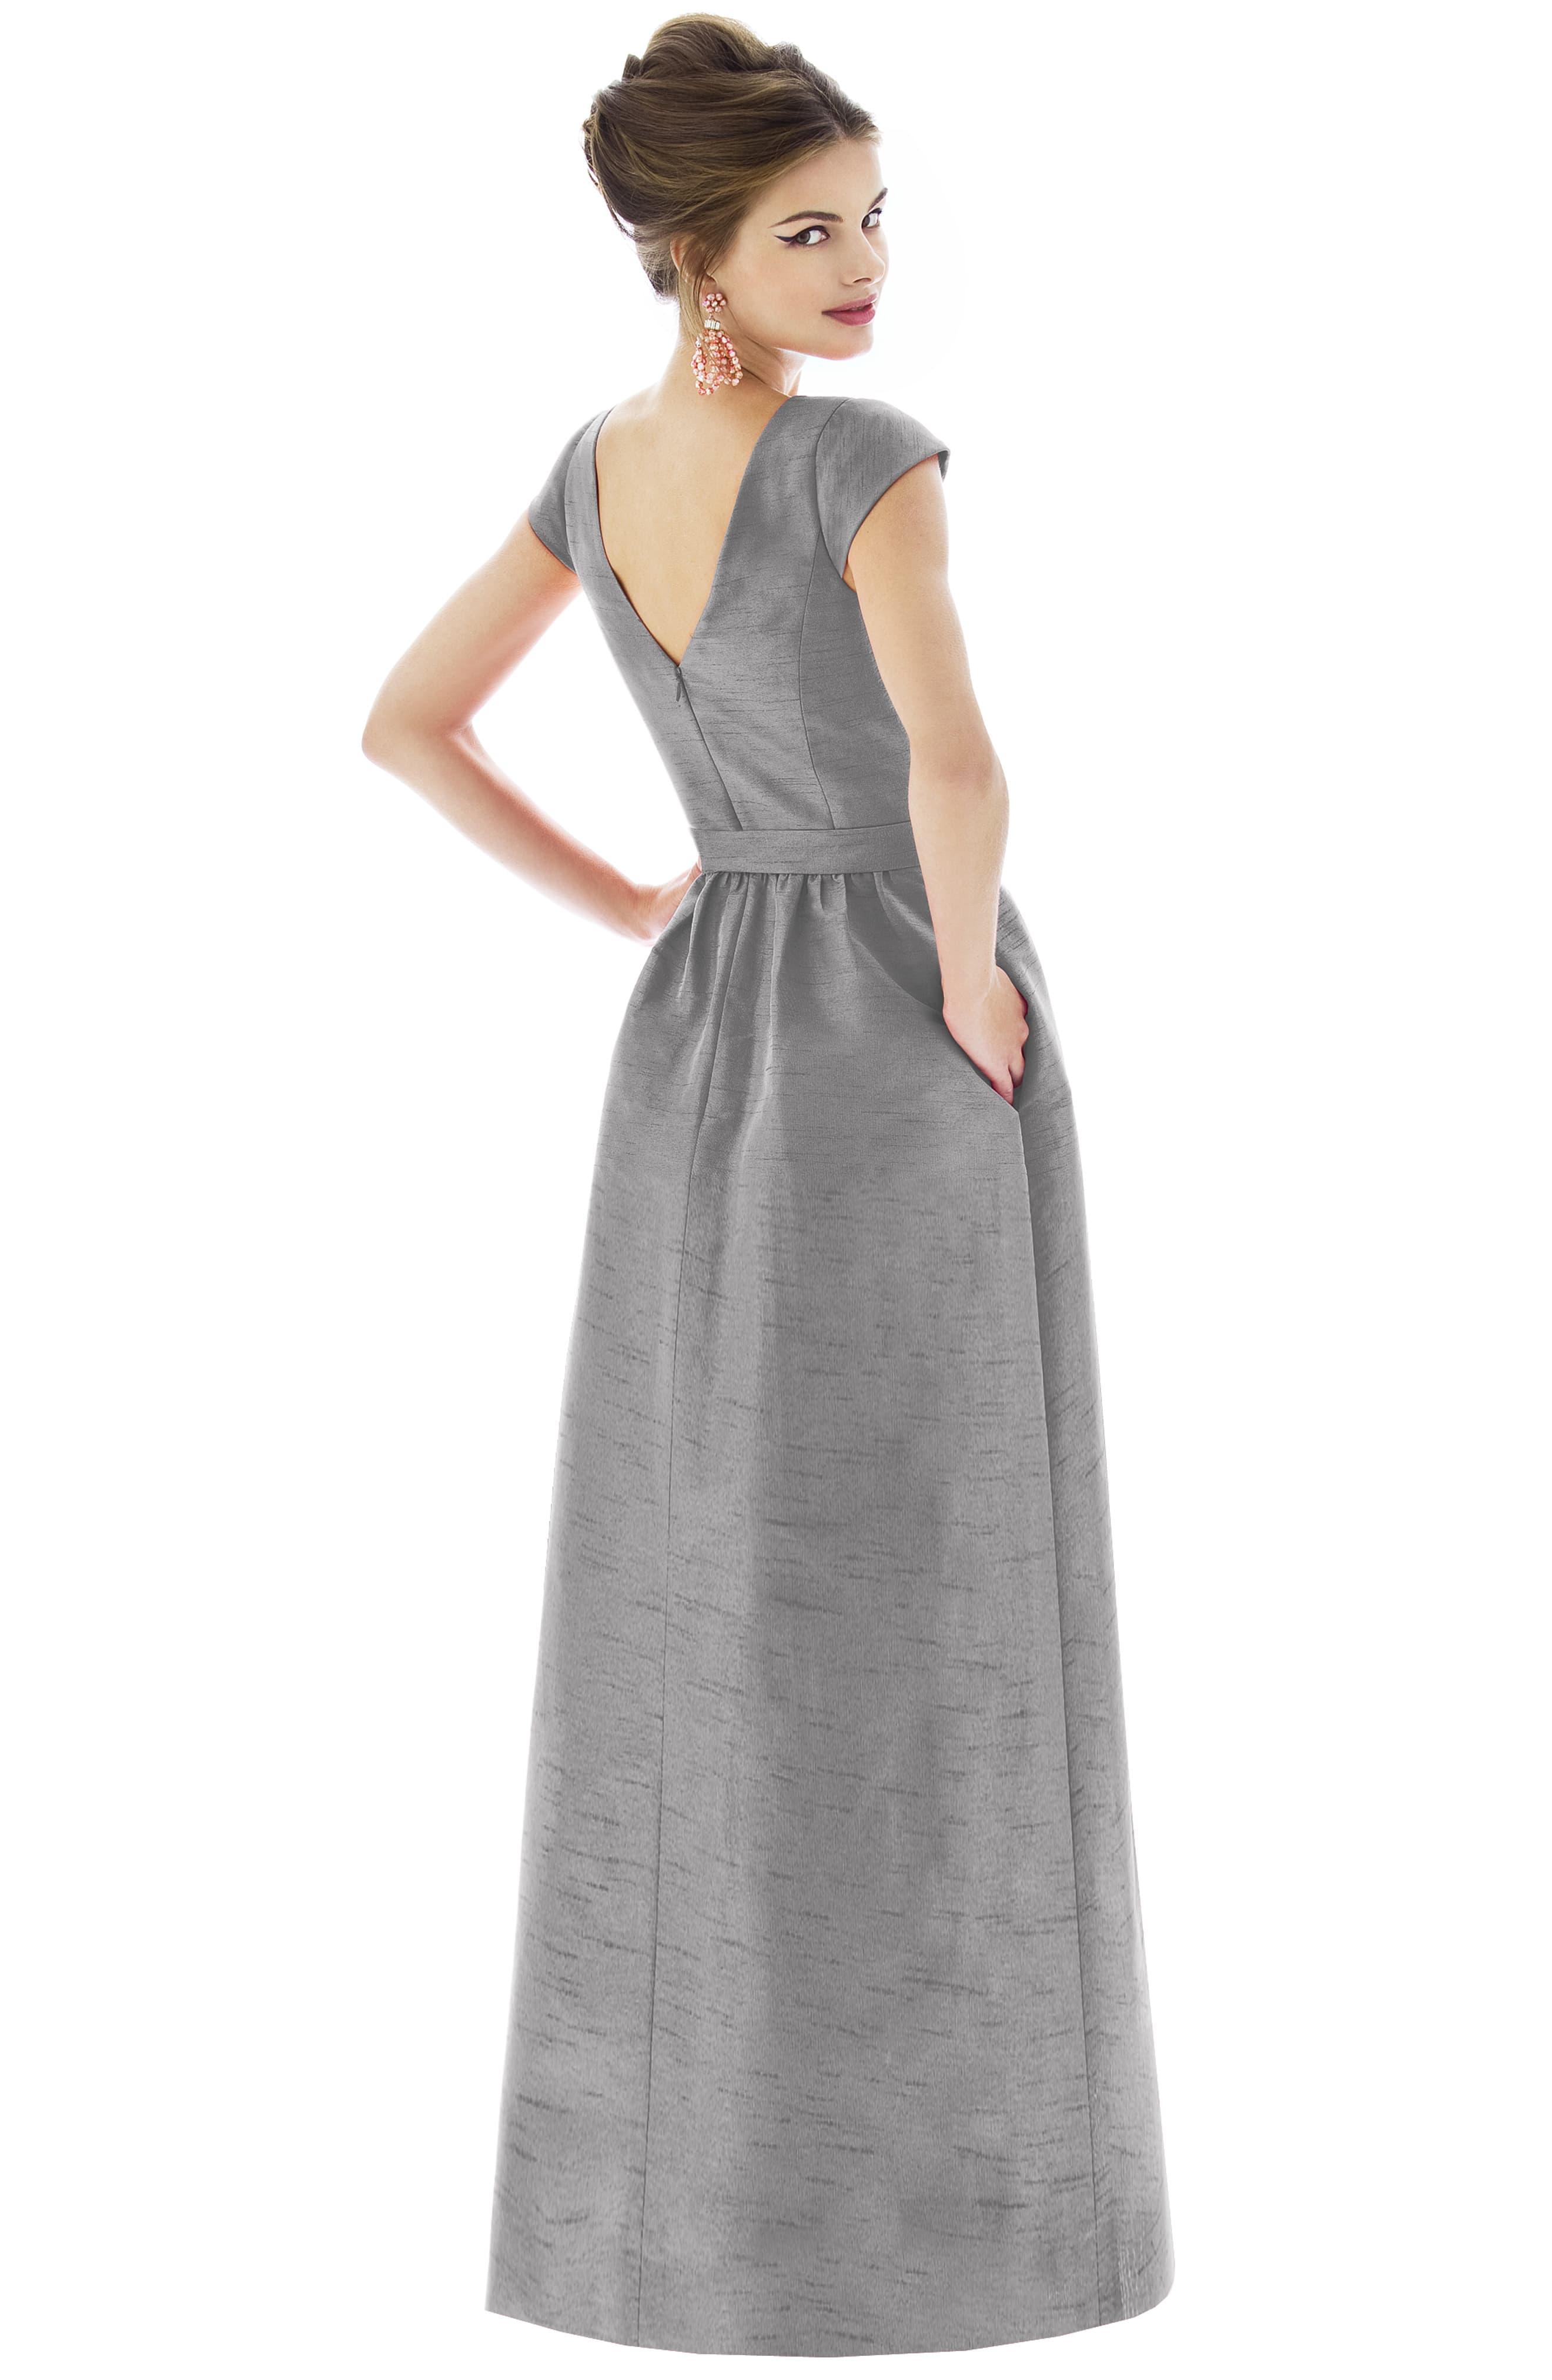 Alfred Sung Cap-Sleeve Dupioni Full-Length Dress in Gray - Lyst